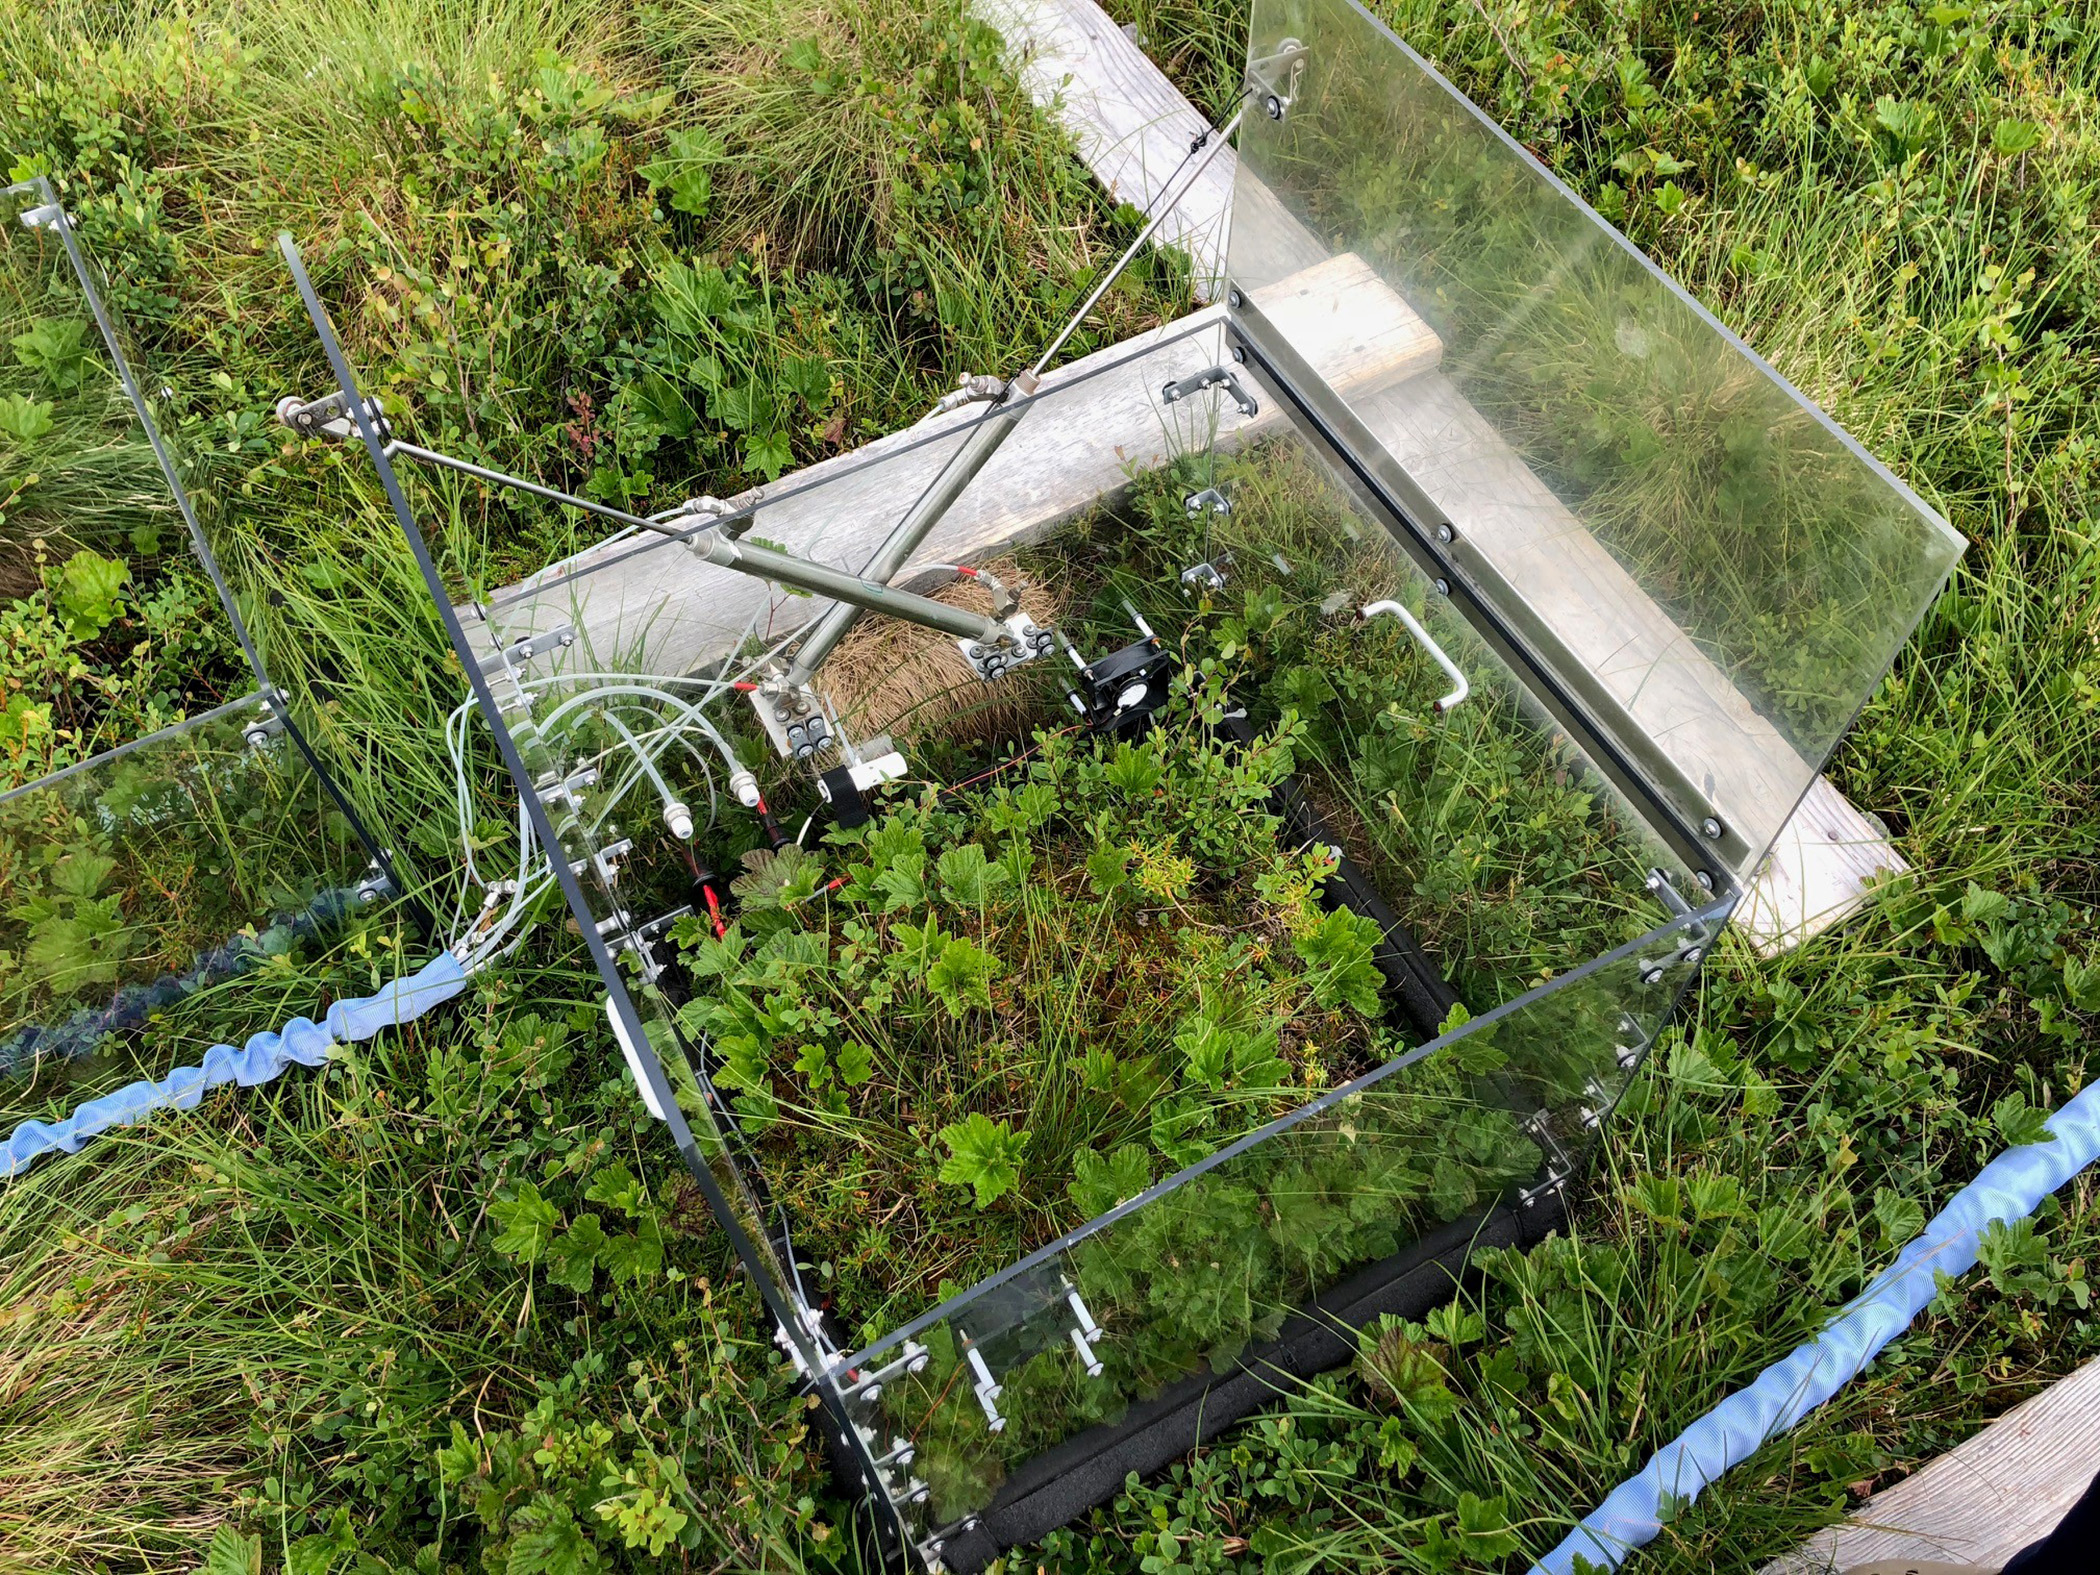 Cumulative respiration from the tundra microbial communities was sampled during the month following removal of the soil cores. (Photo: Professor Ted Schuur, Northern Arizona University)